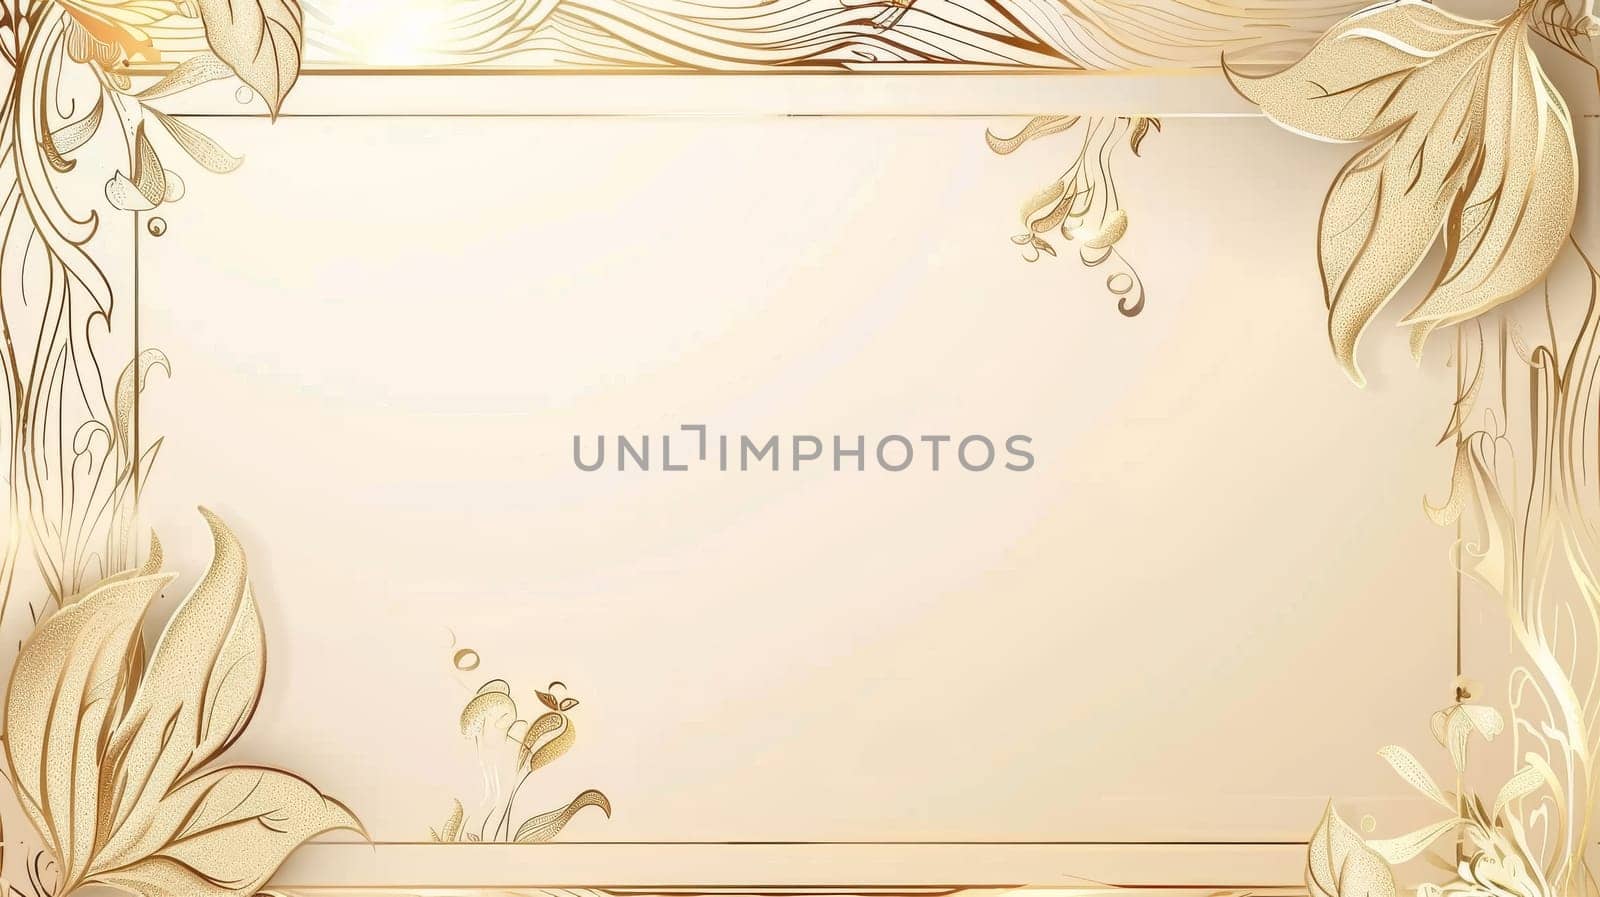 The premium design illustration is suitable for galas, grand openings, art deco style events, etc. Elegant retro classic art nouveau design on light background with gold lines gradient frame. by Andrei_01